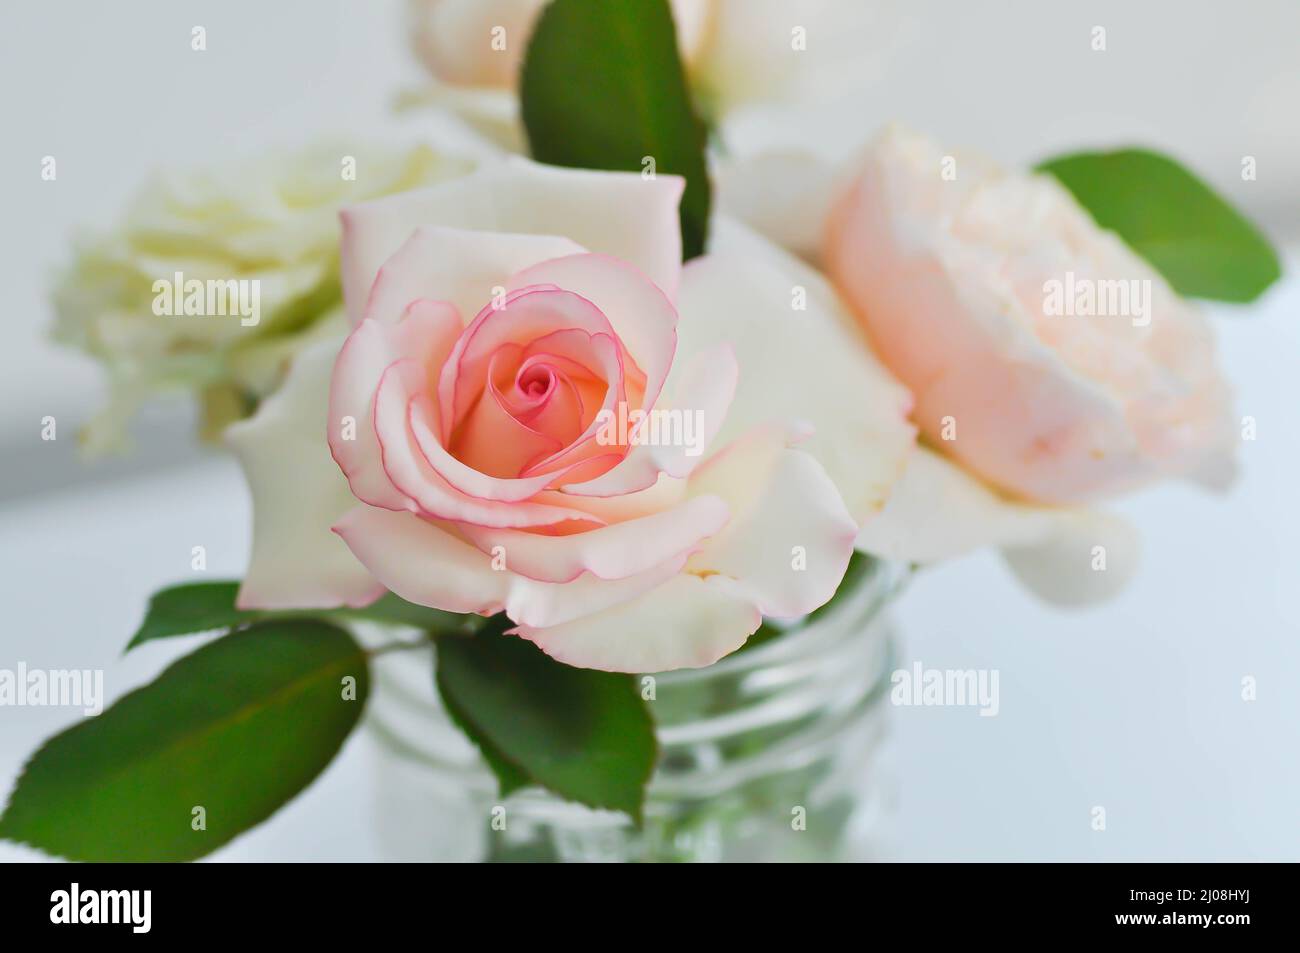 rose, roses or flowers in a vase Stock Photo